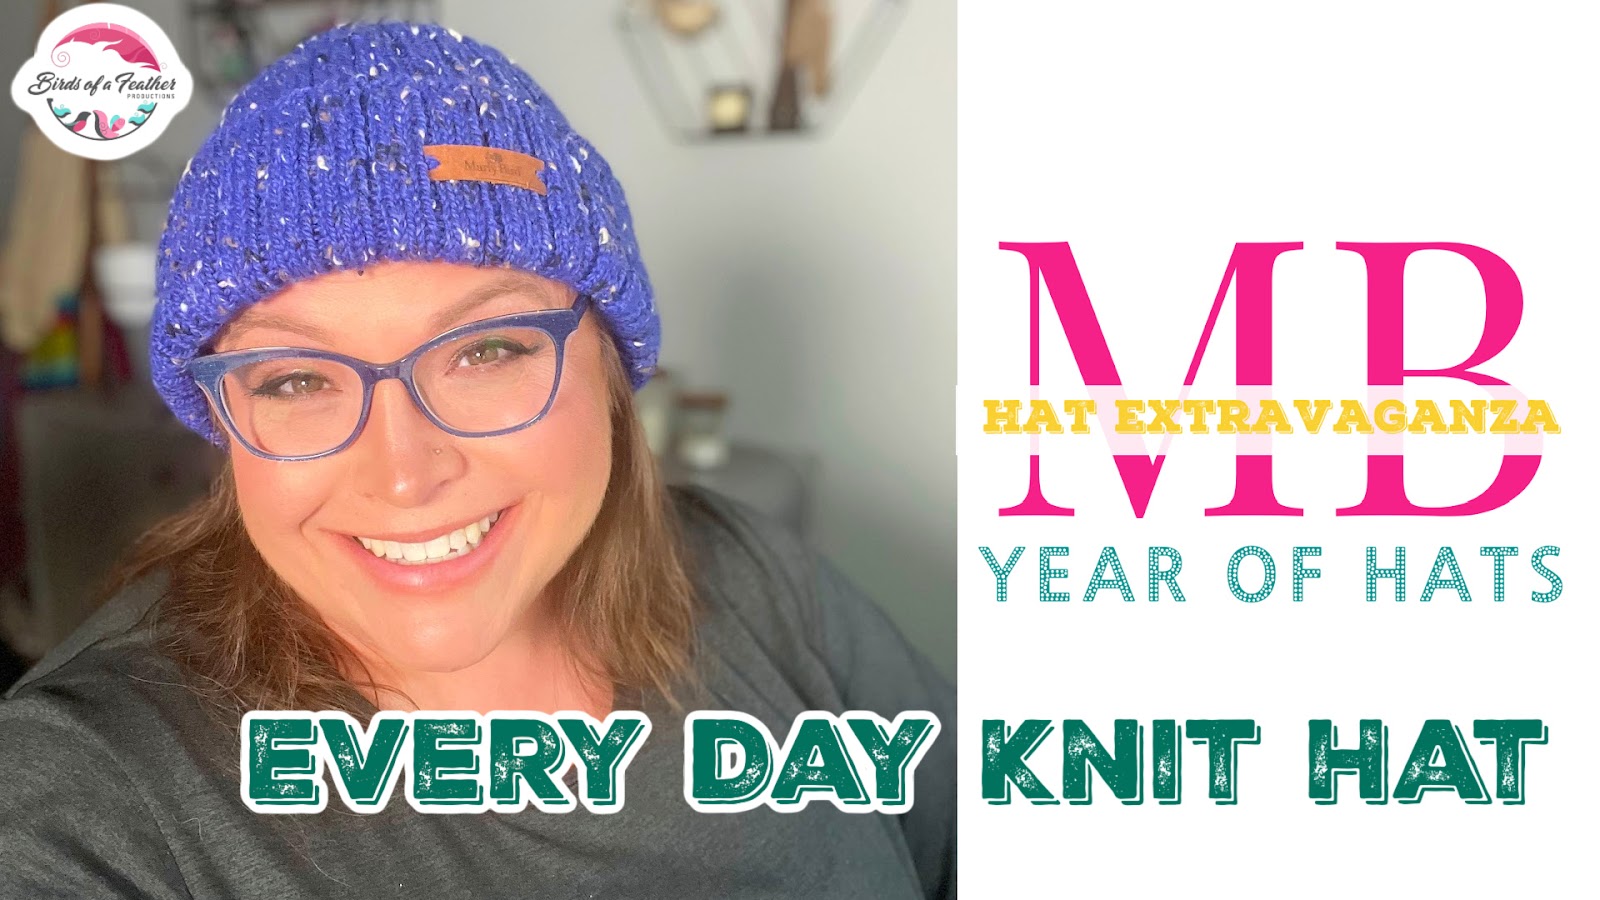 Marly Bird Wearing the Every Day Knit Hat in Cobalt Blue - text: MB Hat Extravaganza Year of Hats, Every Day Knit Hat
